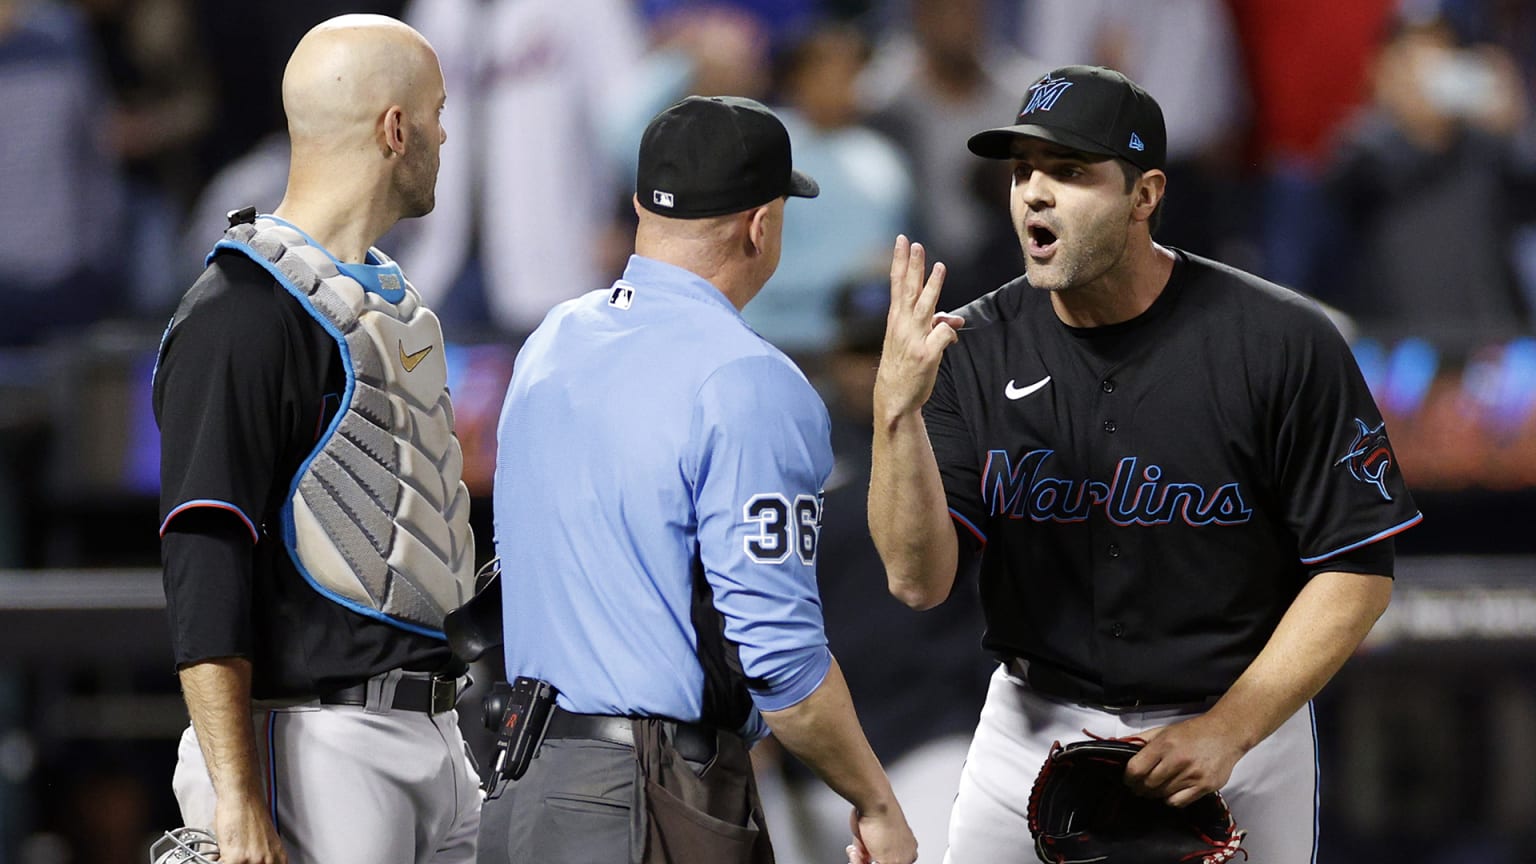 Marlins pitcher Richard Bleier holds up 3 fingers while arguing with an umpire as Marlins catcher Josh Stallings looks on